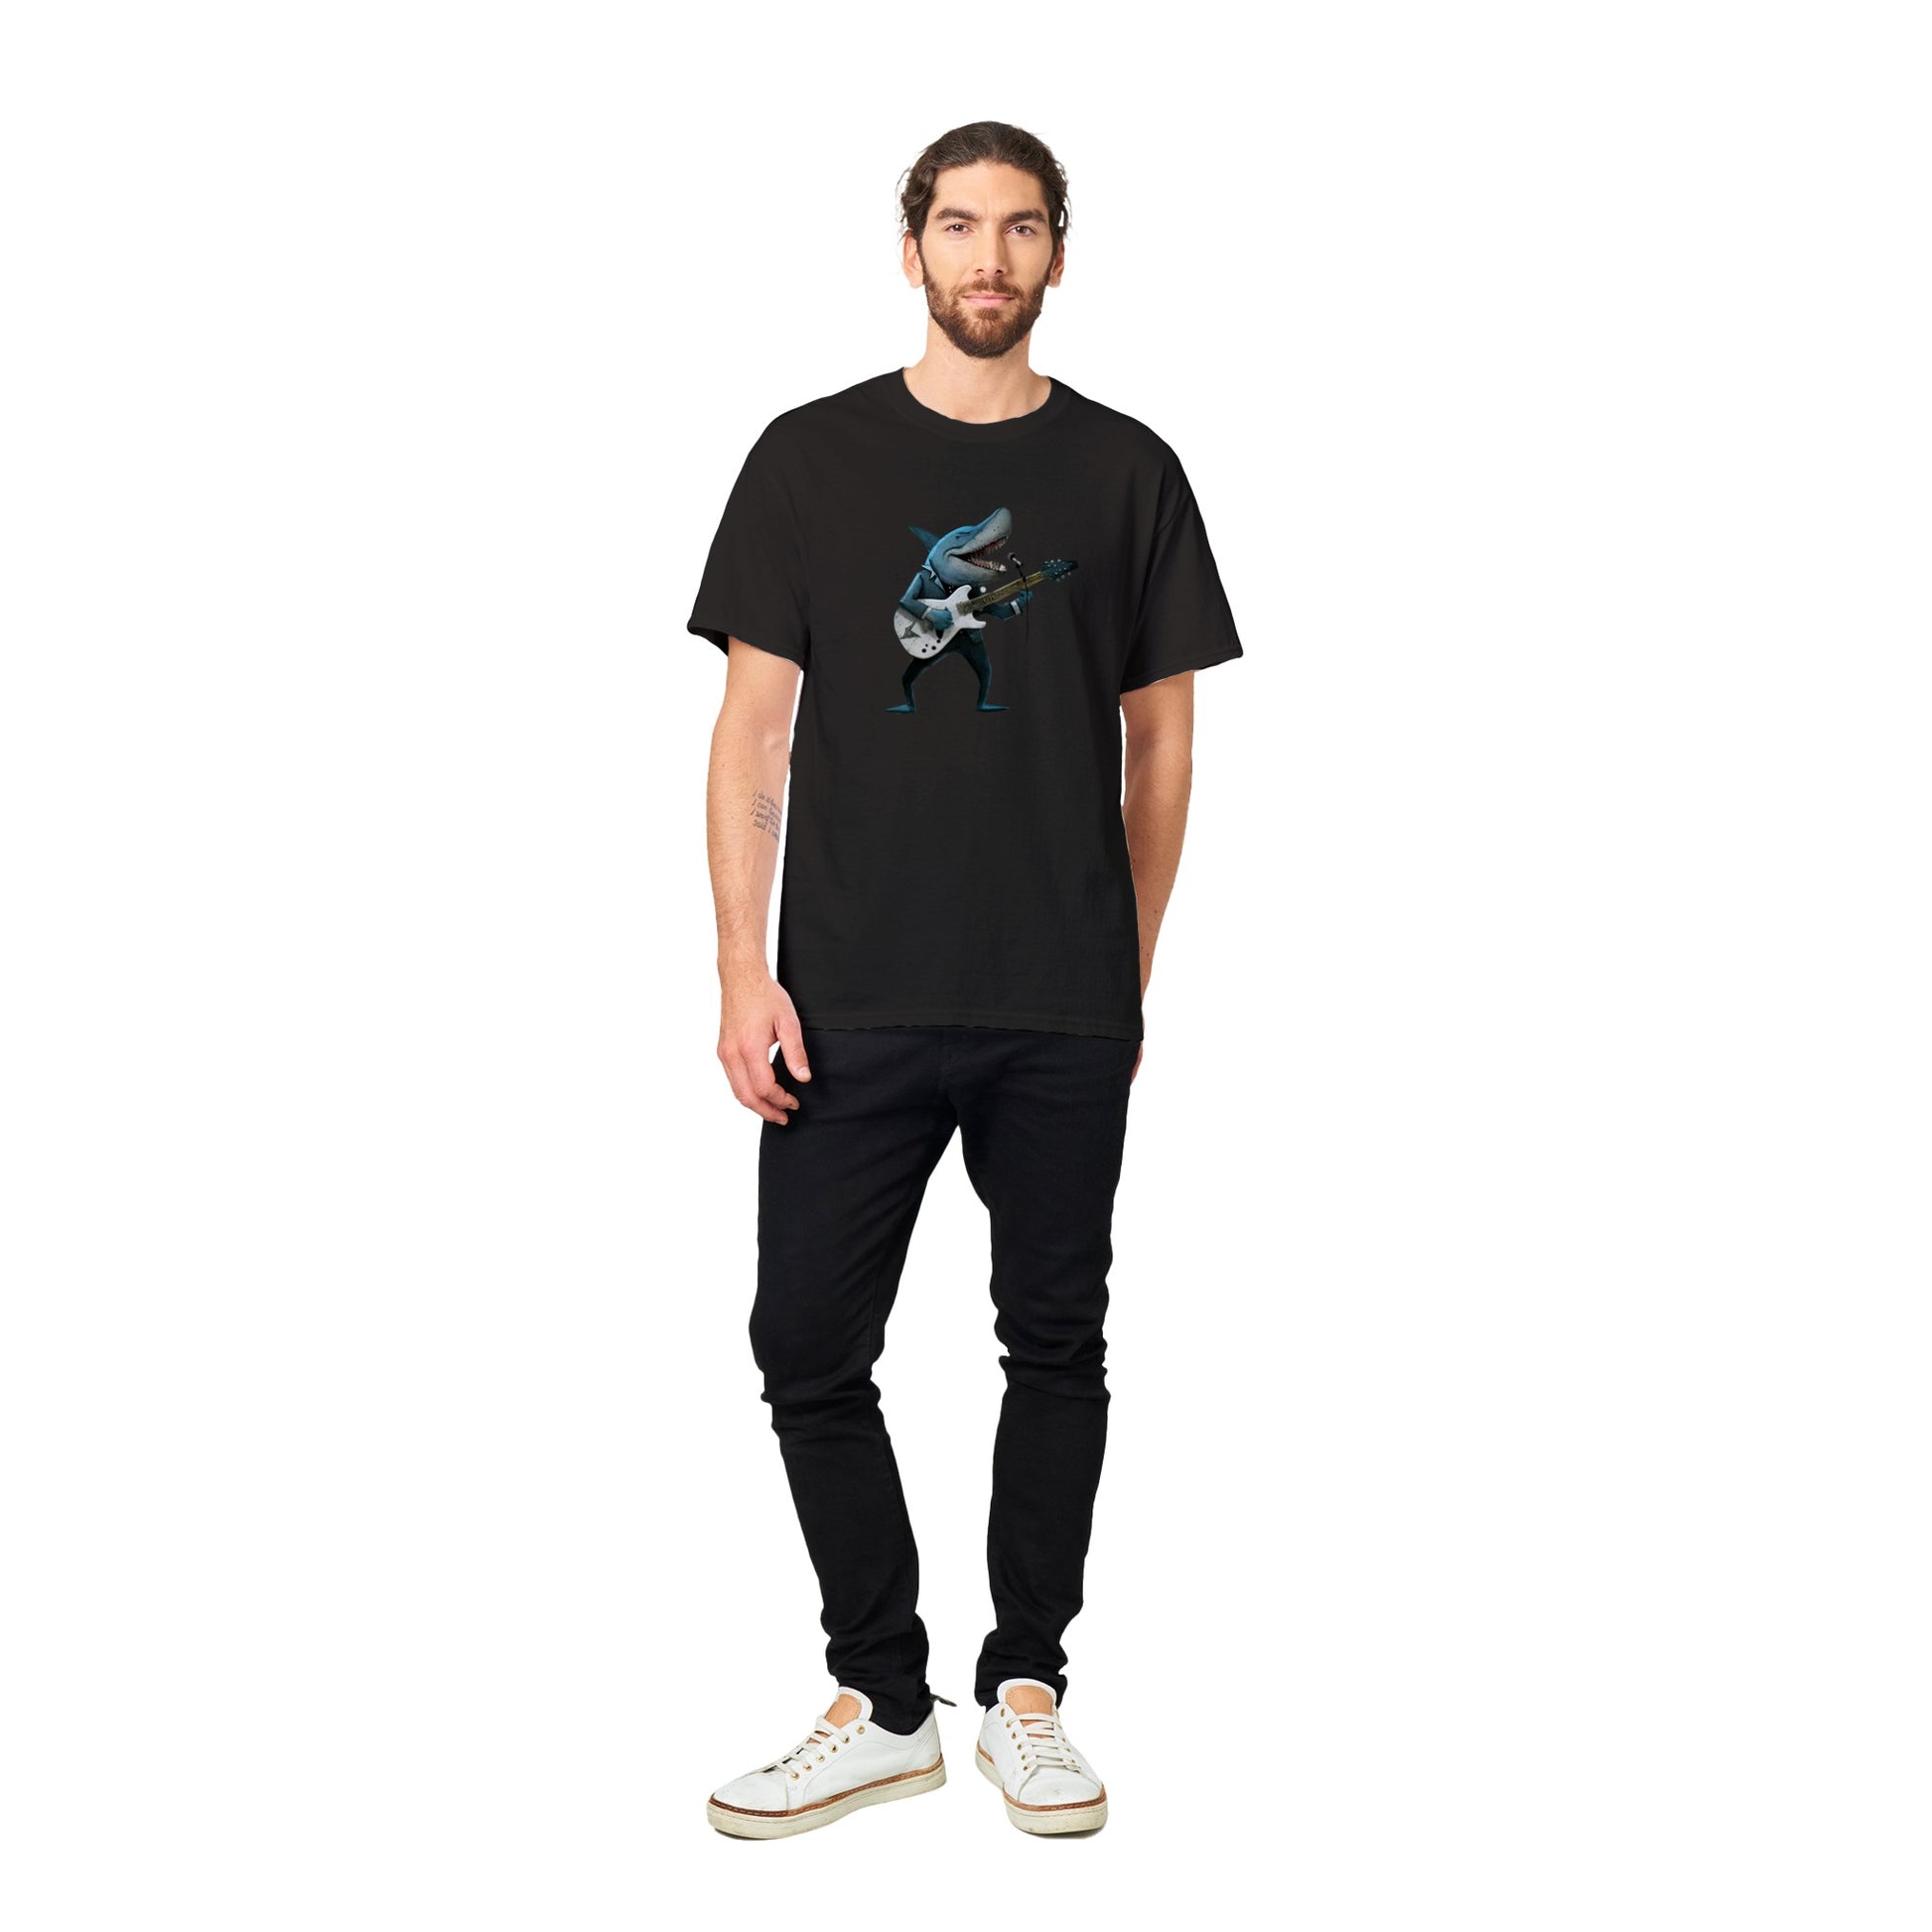 Guy wearing a black t-shirt with a shark playing guitar print